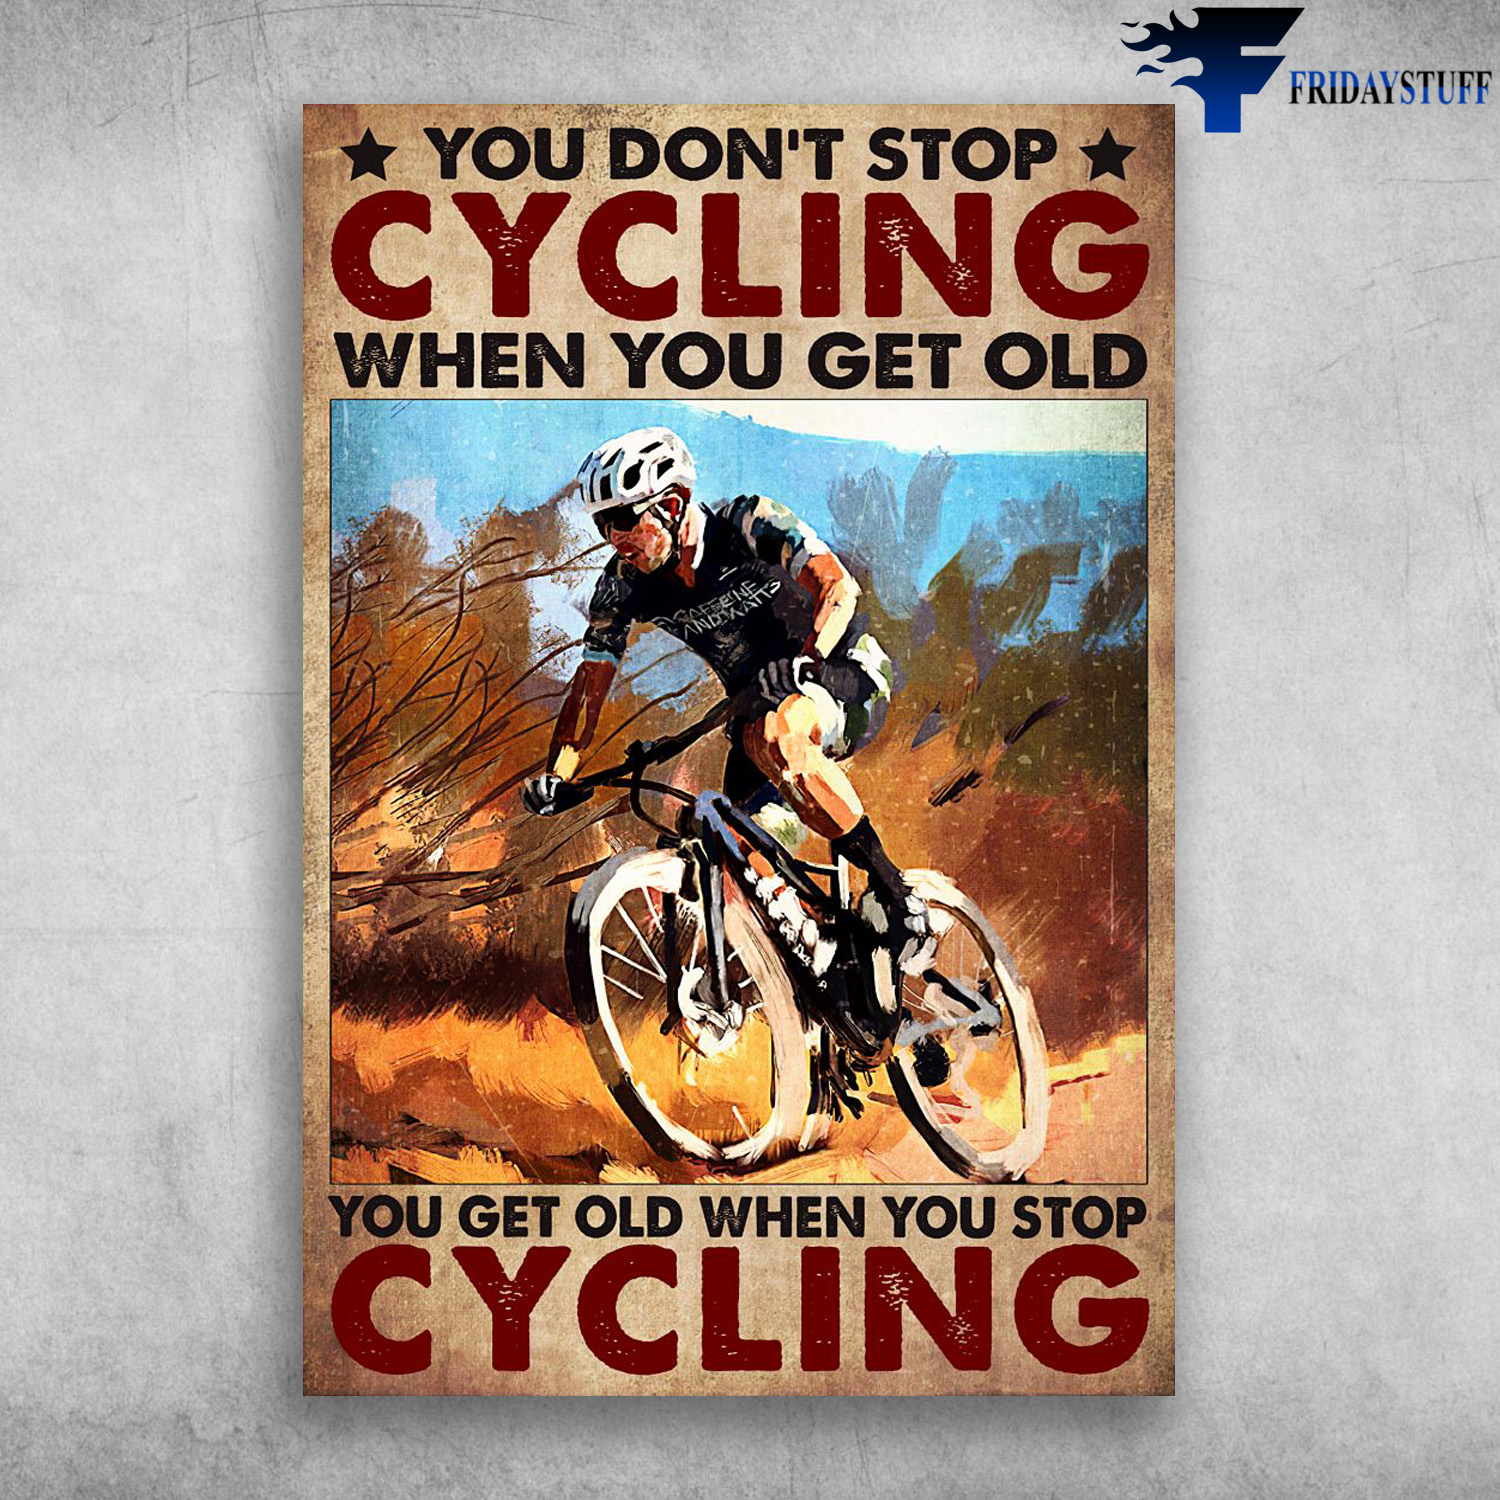 Bicycle Rider - You Don't Stop Cycling When You Get Old, You Get Old When You Stop Cycling